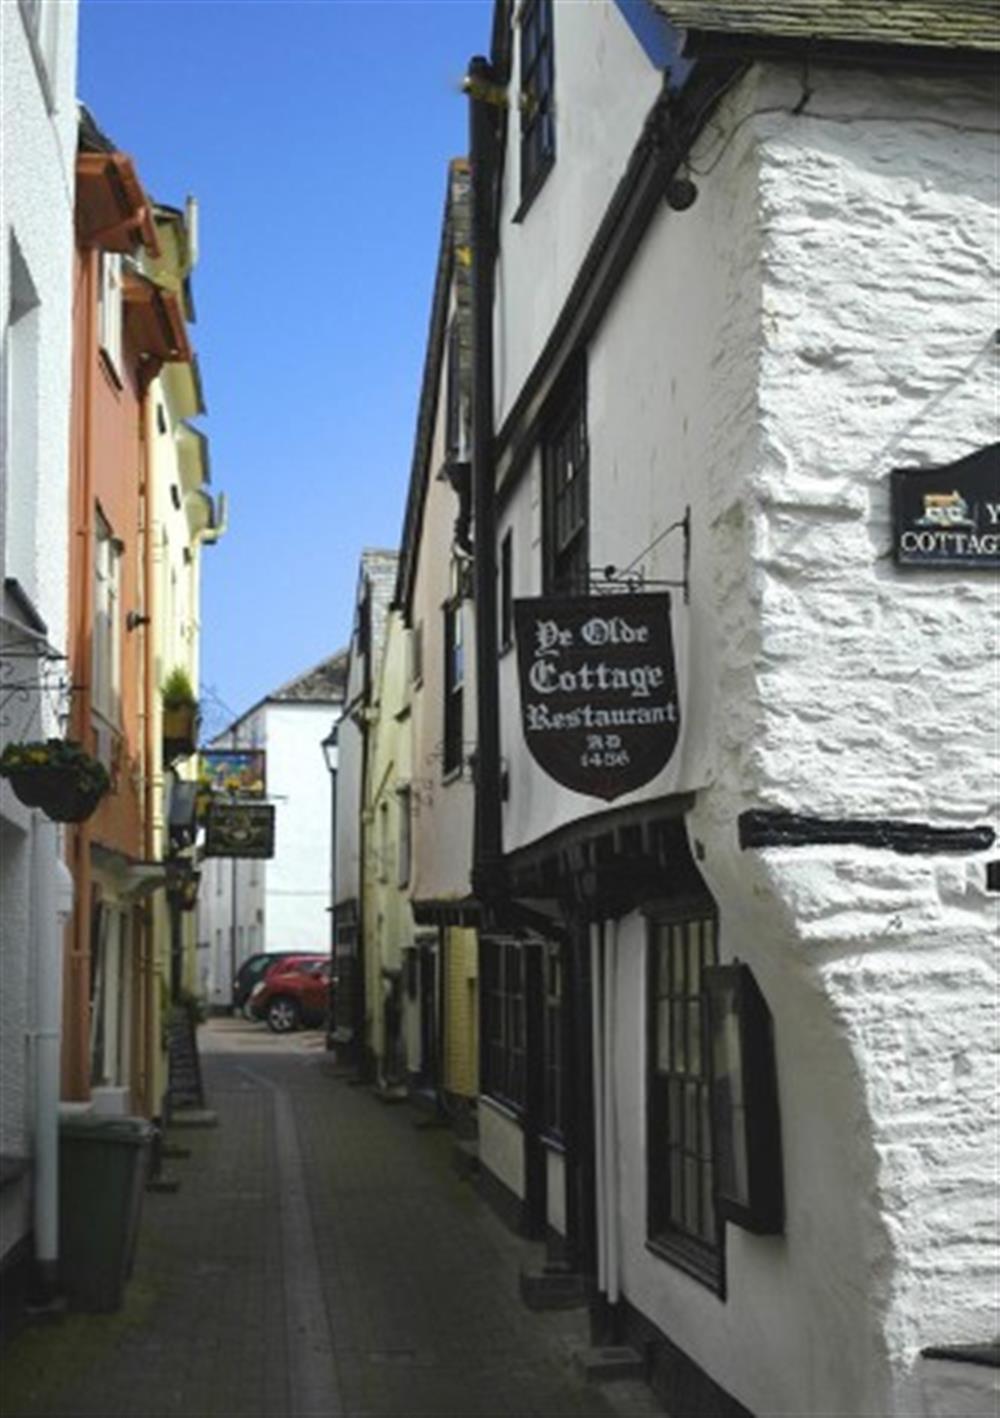 The narrow quaint streets in parts of the Old Town of East Looe. at The Fellery in Looe